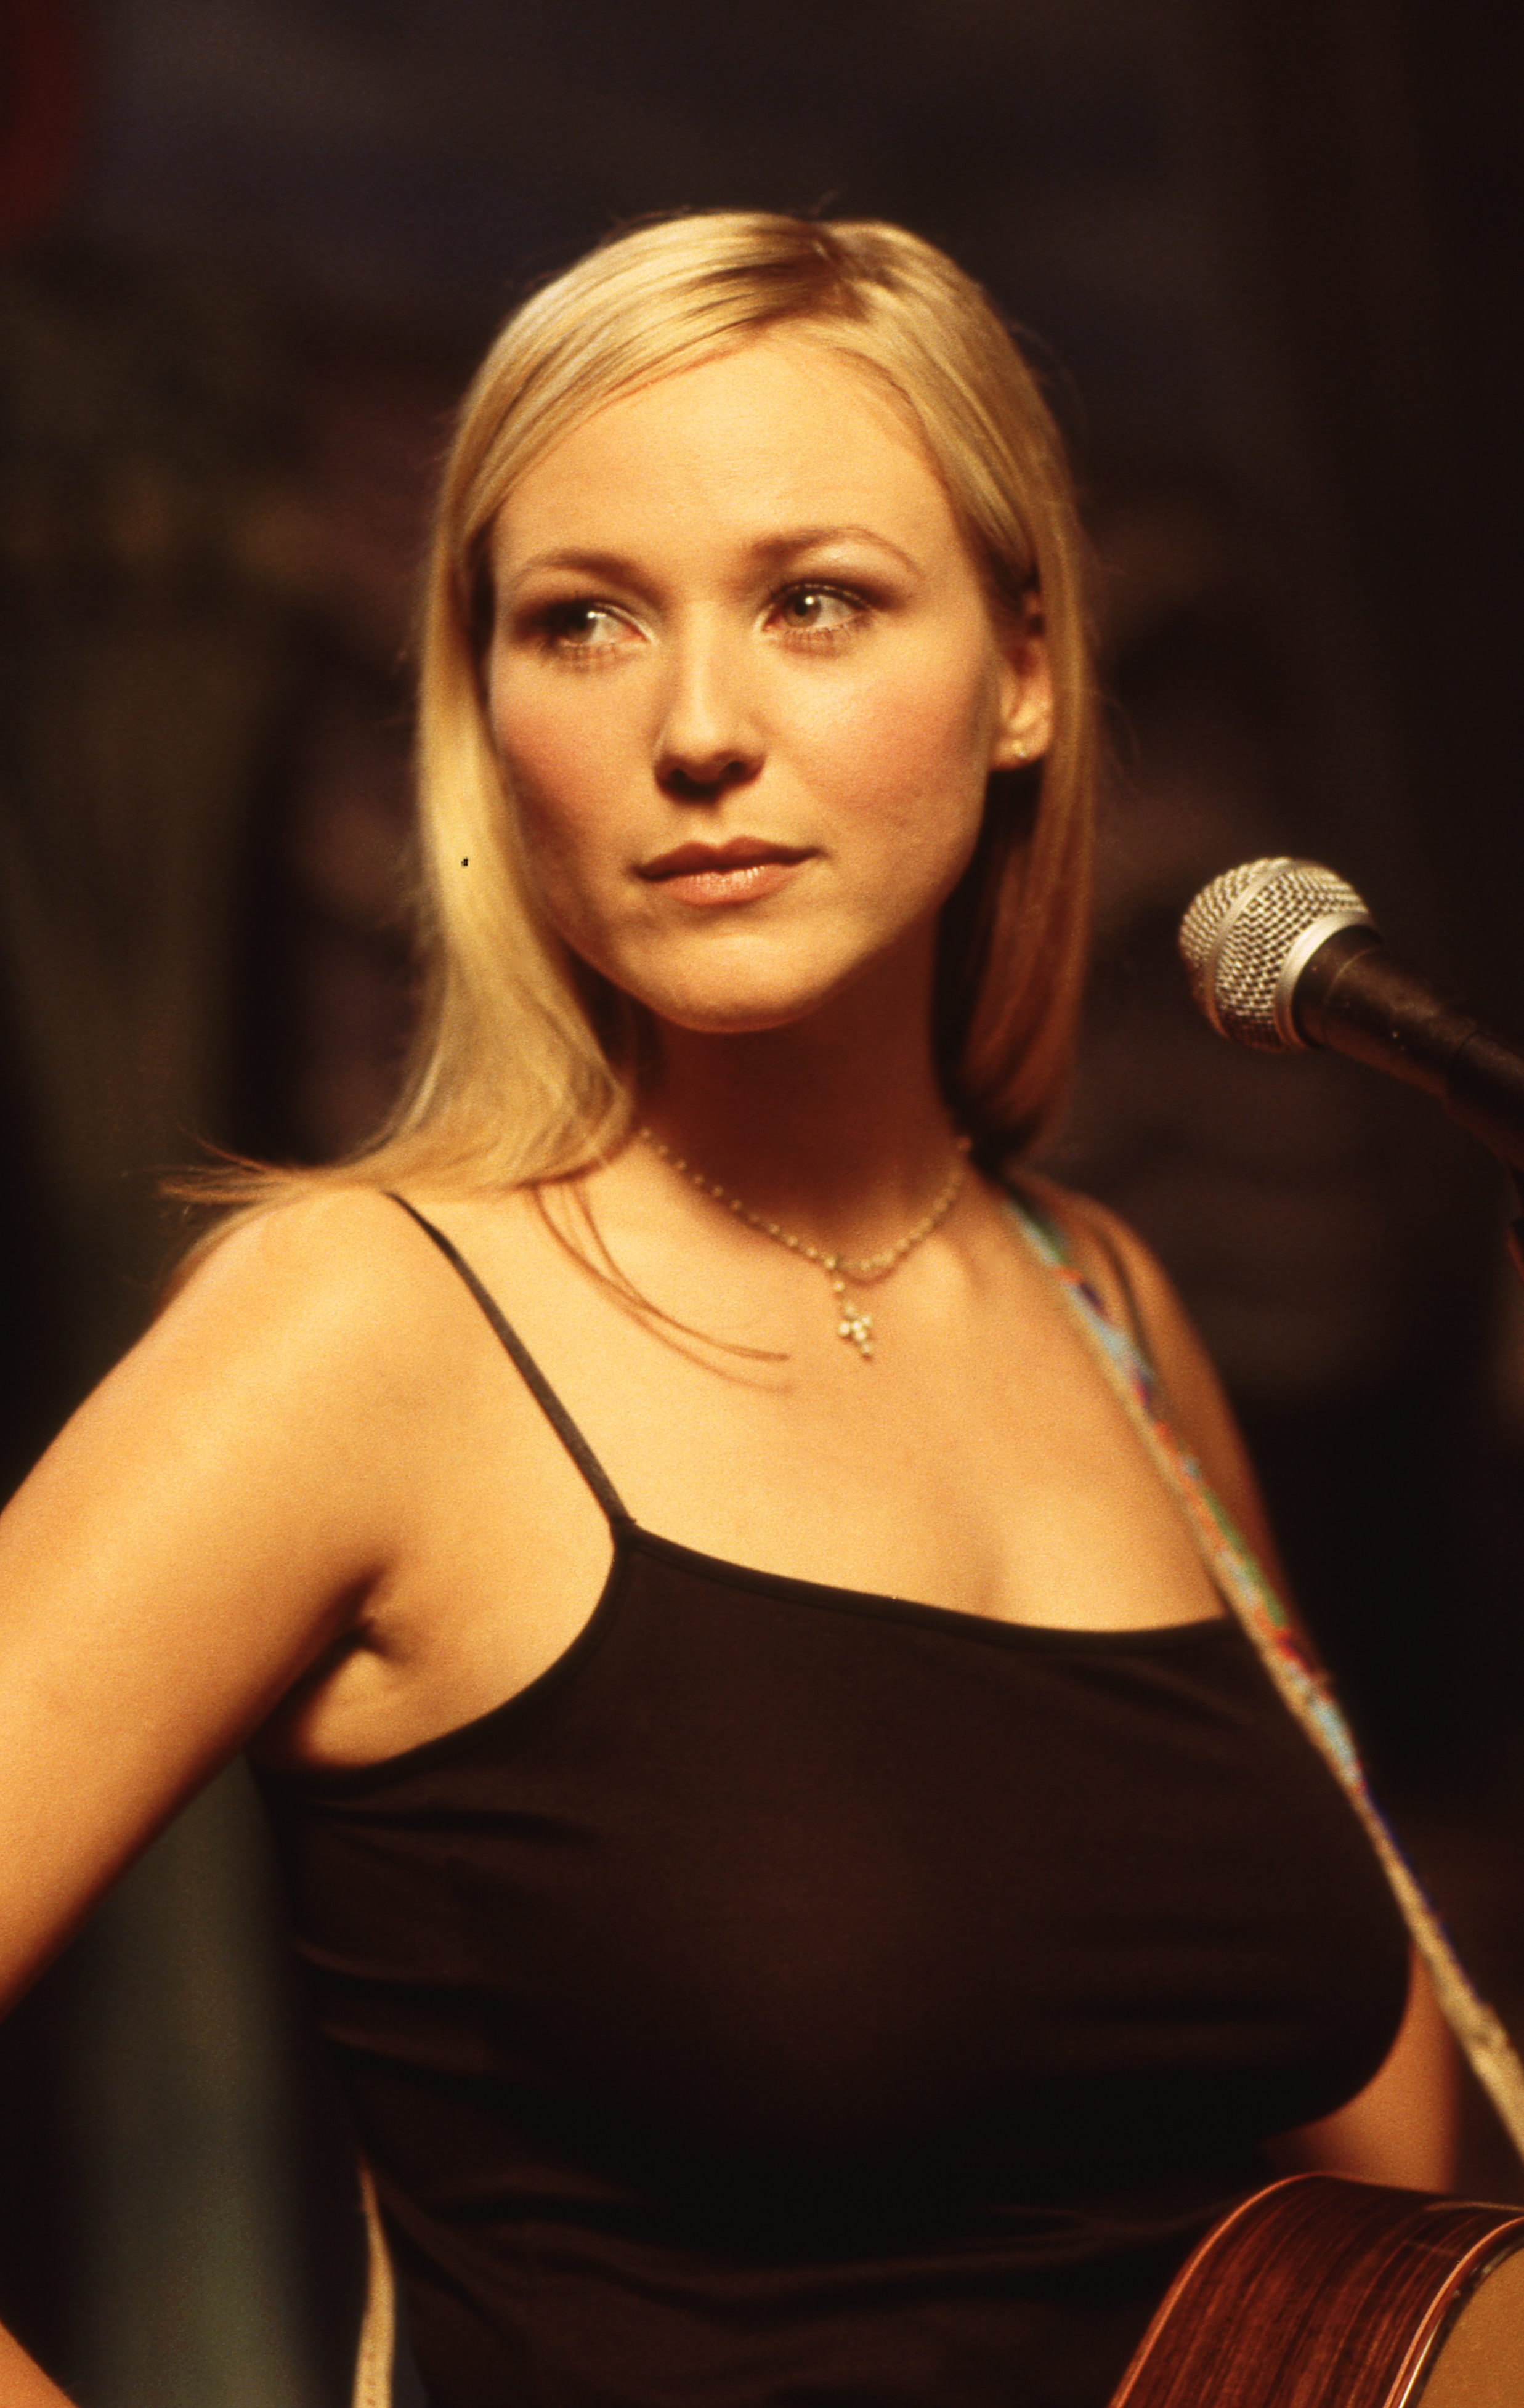 Jewel in 1998. | Source: Getty Images